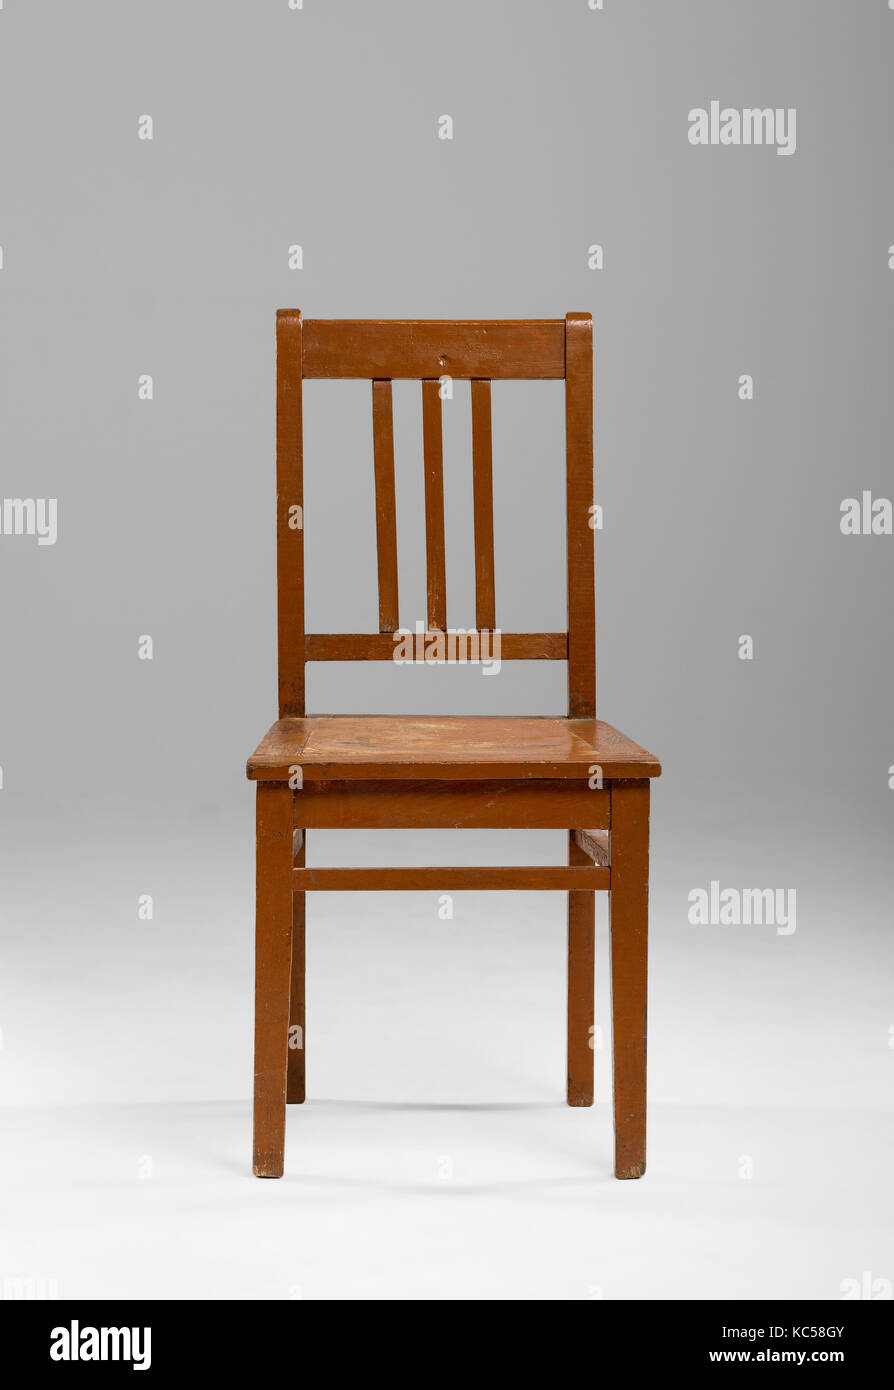 Simple old used wooden chair in empty room on gradient gray background  Stock Photo - Alamy